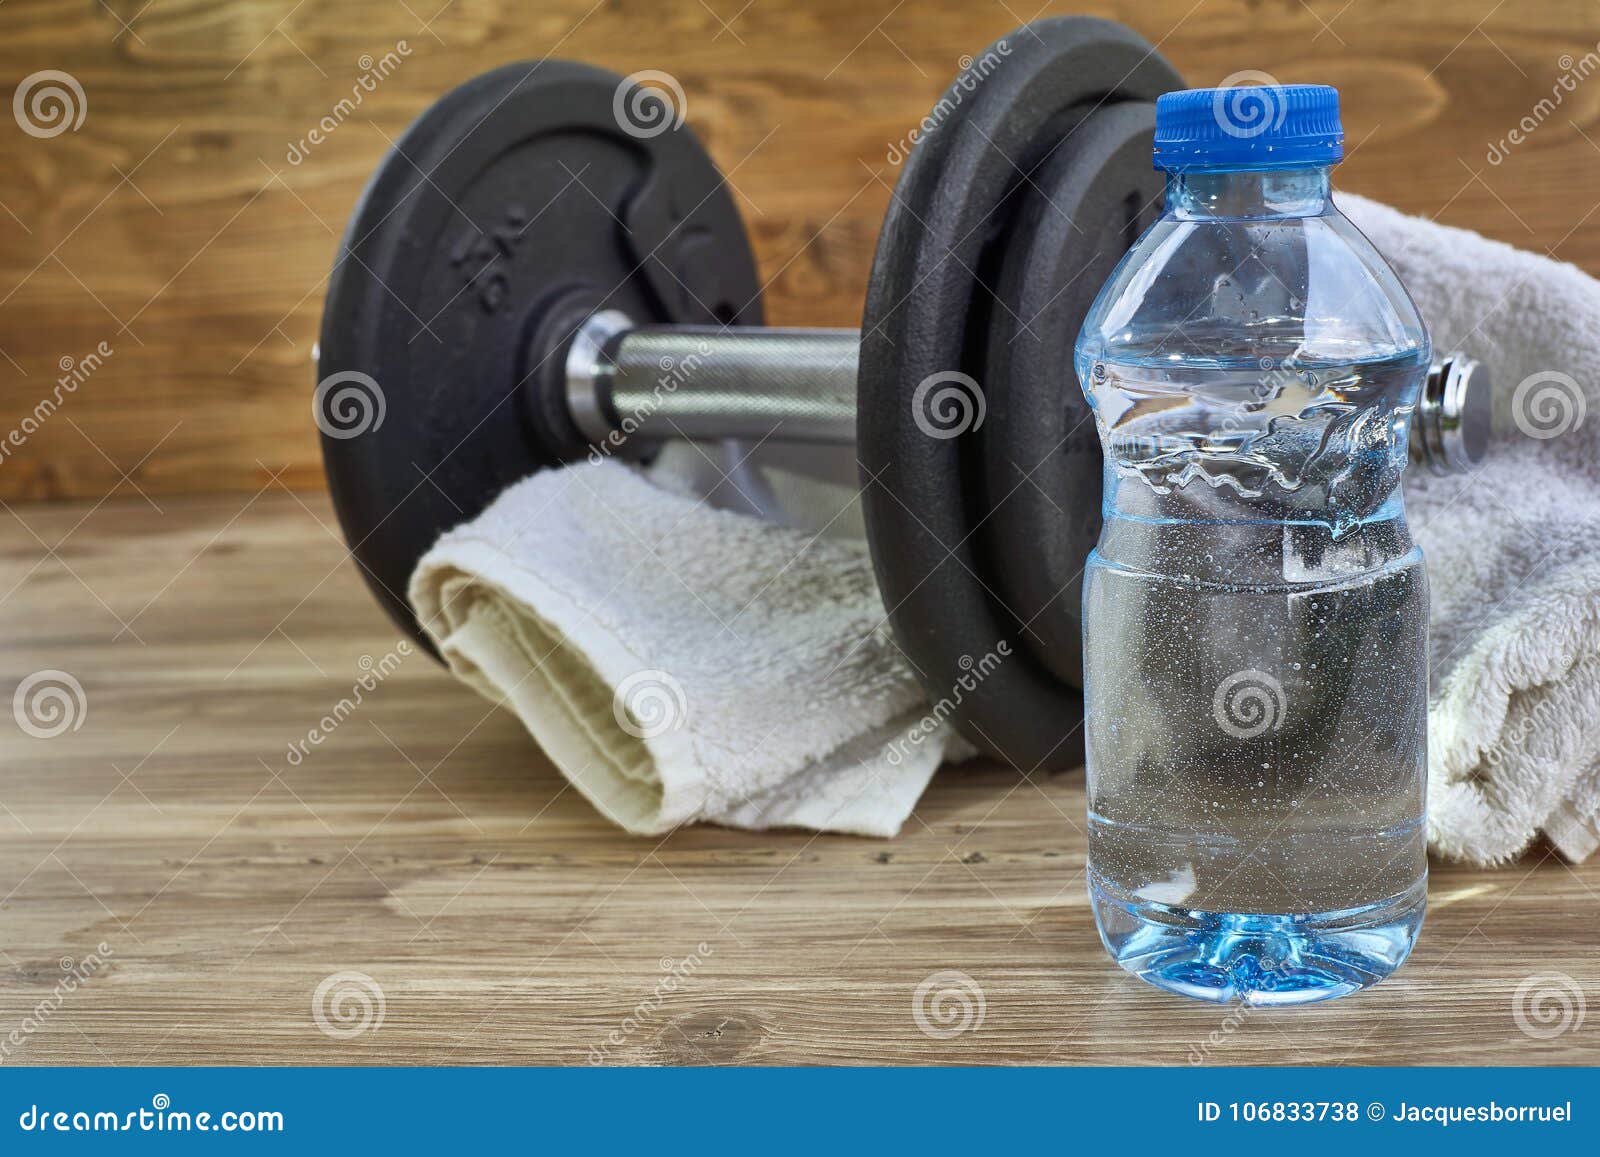 https://thumbs.dreamstime.com/z/concept-fitness-equipment-dumbbell-bottle-water-towel-fitness-workout-slimming-exercises-weight-loss-diet-healthy-106833738.jpg